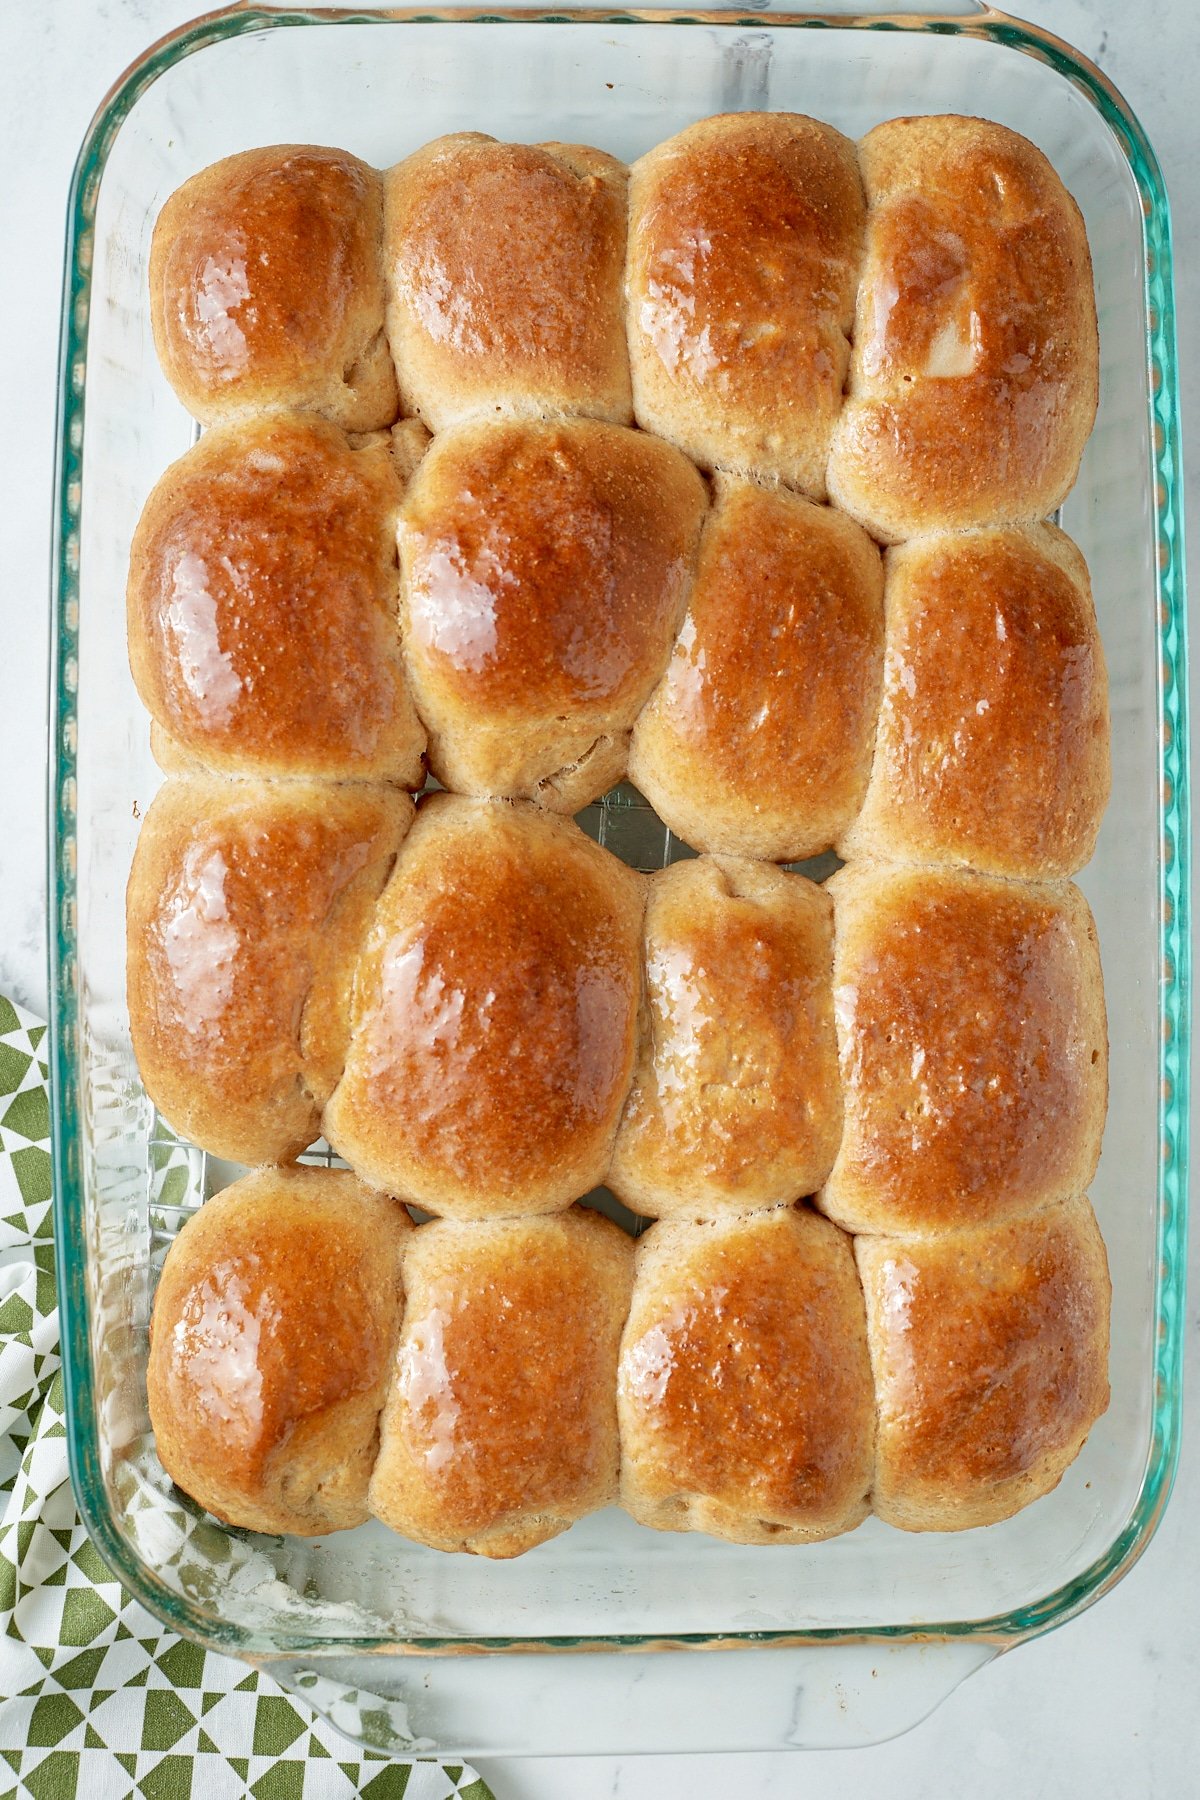 Baked honey whole wheat dinner rolls in a glass baking dish.